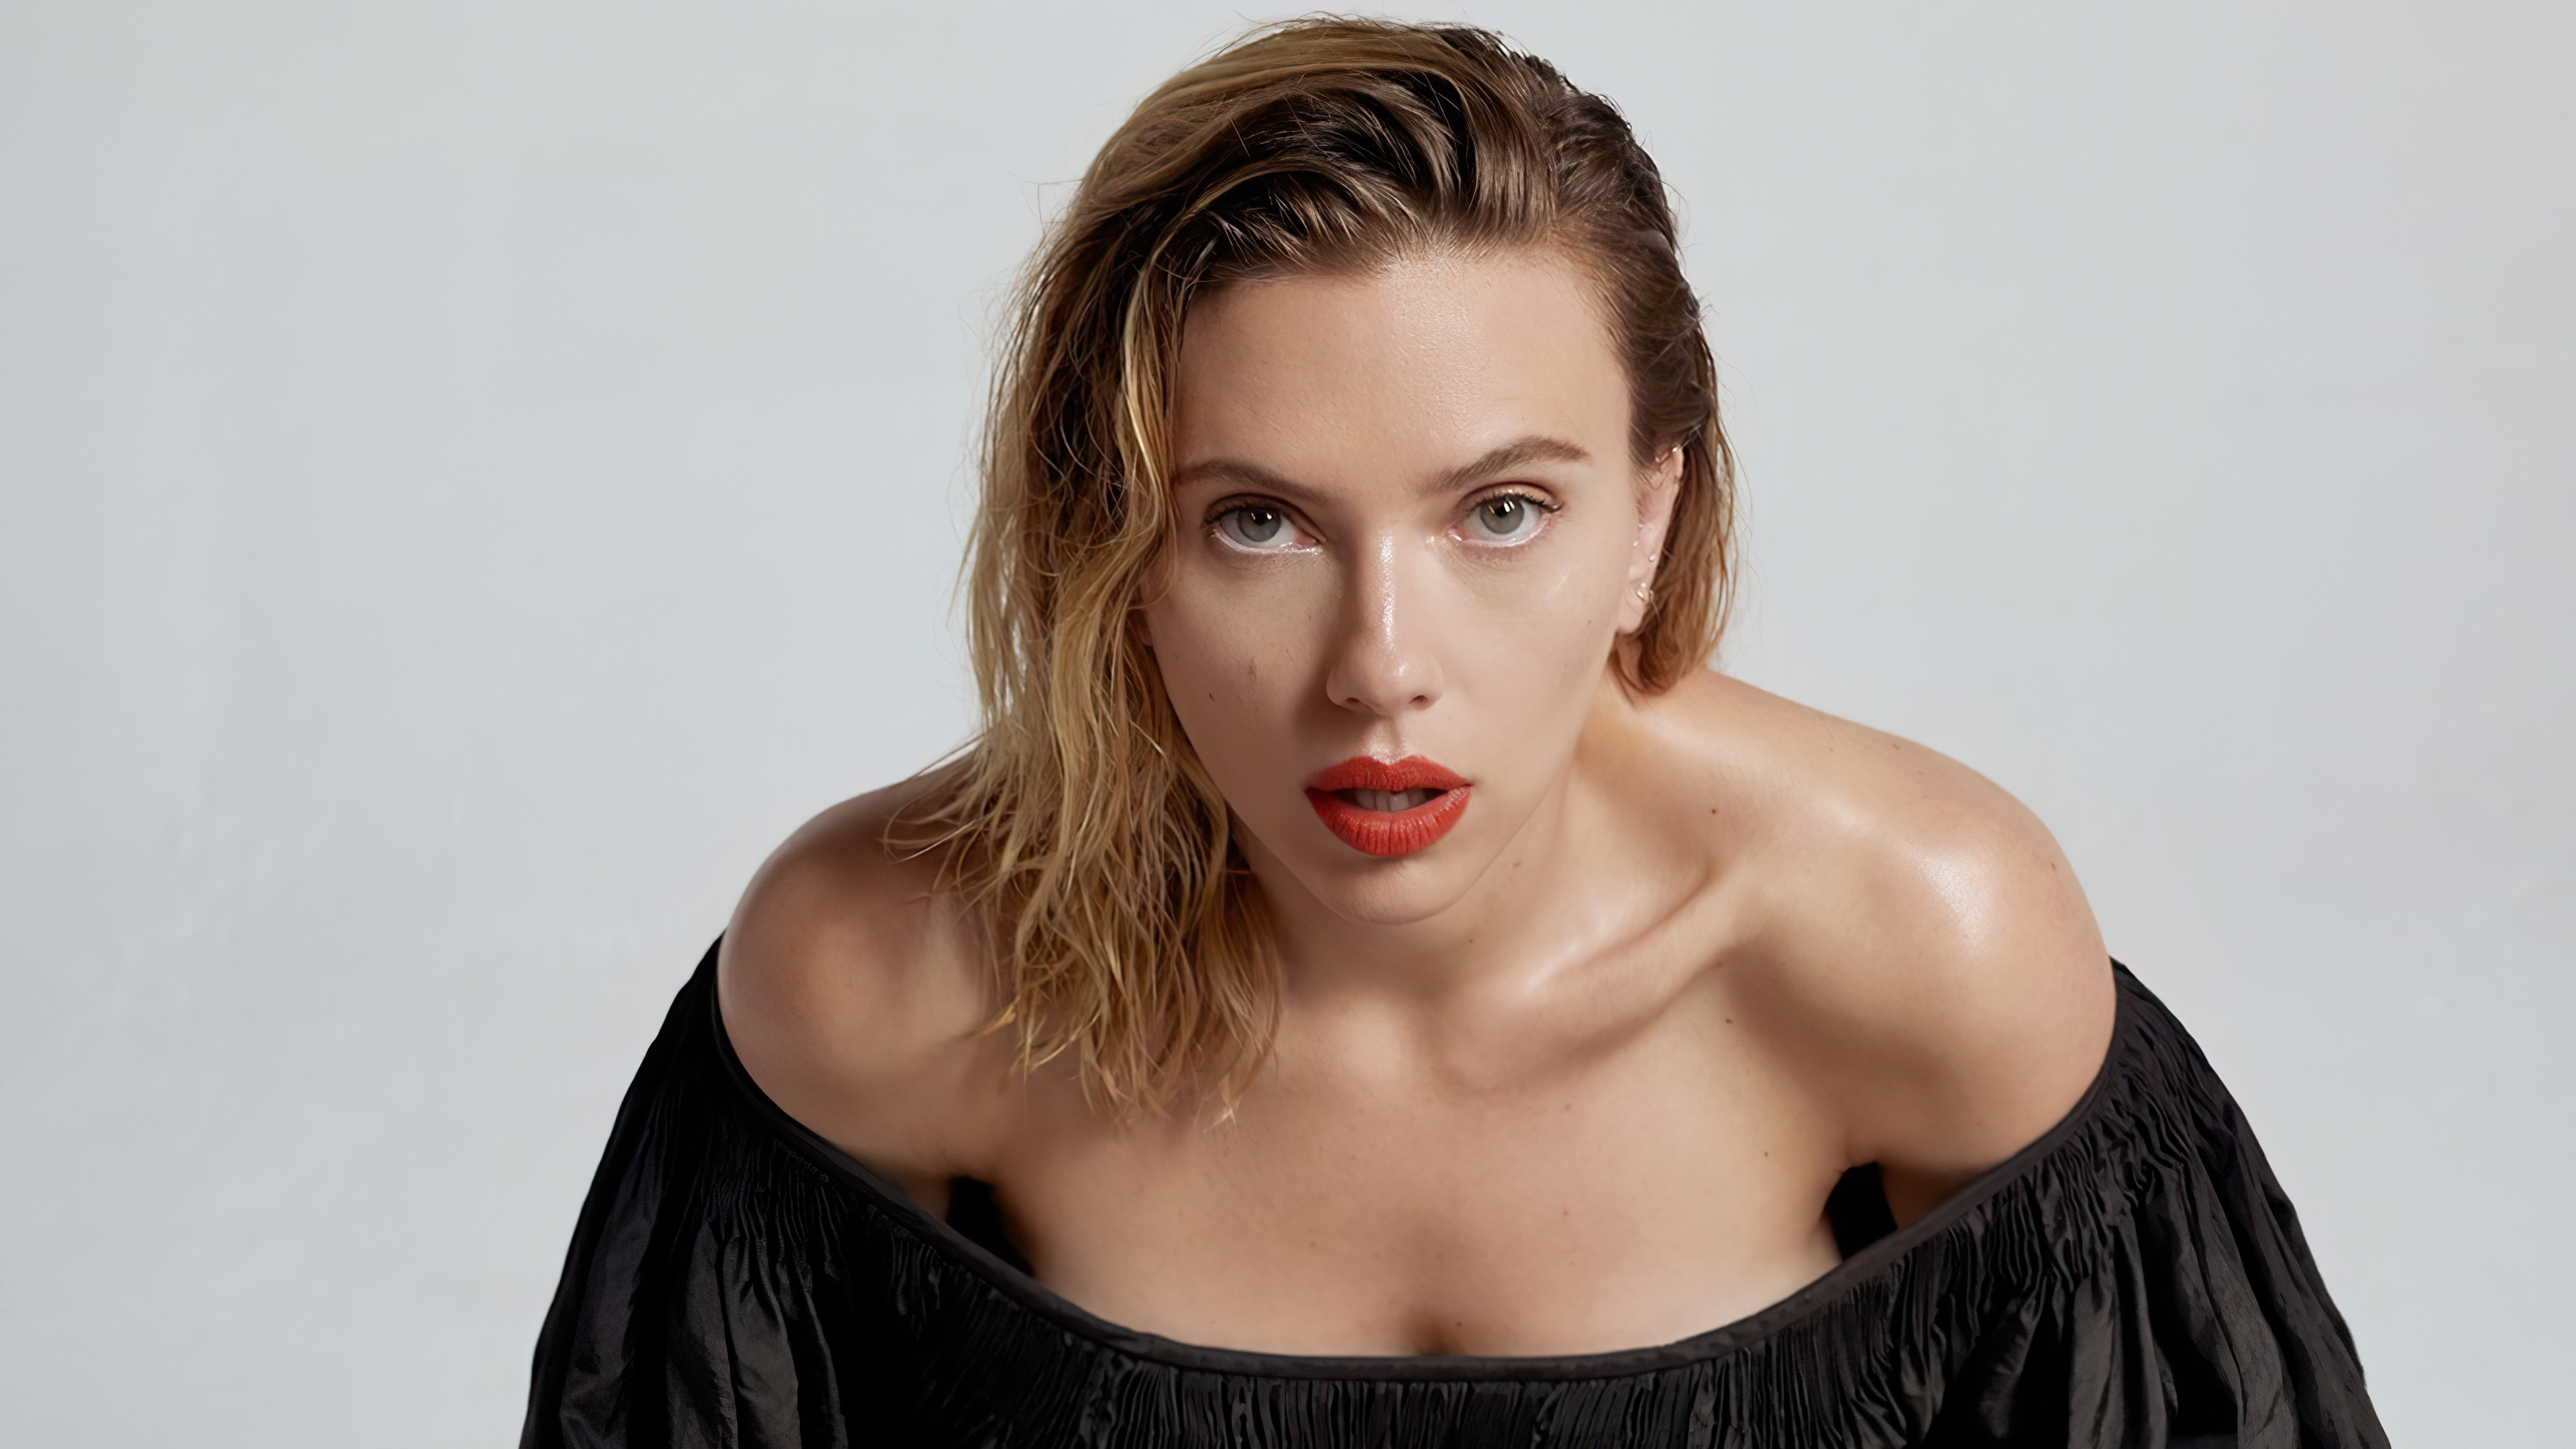 3840x2160 1920x1080 Scarlett Johansson Vanity Fair 2020 Laptop Full HD 1080P HD 4k Wallpapers, Images, Backgrounds, Photos and Pictures